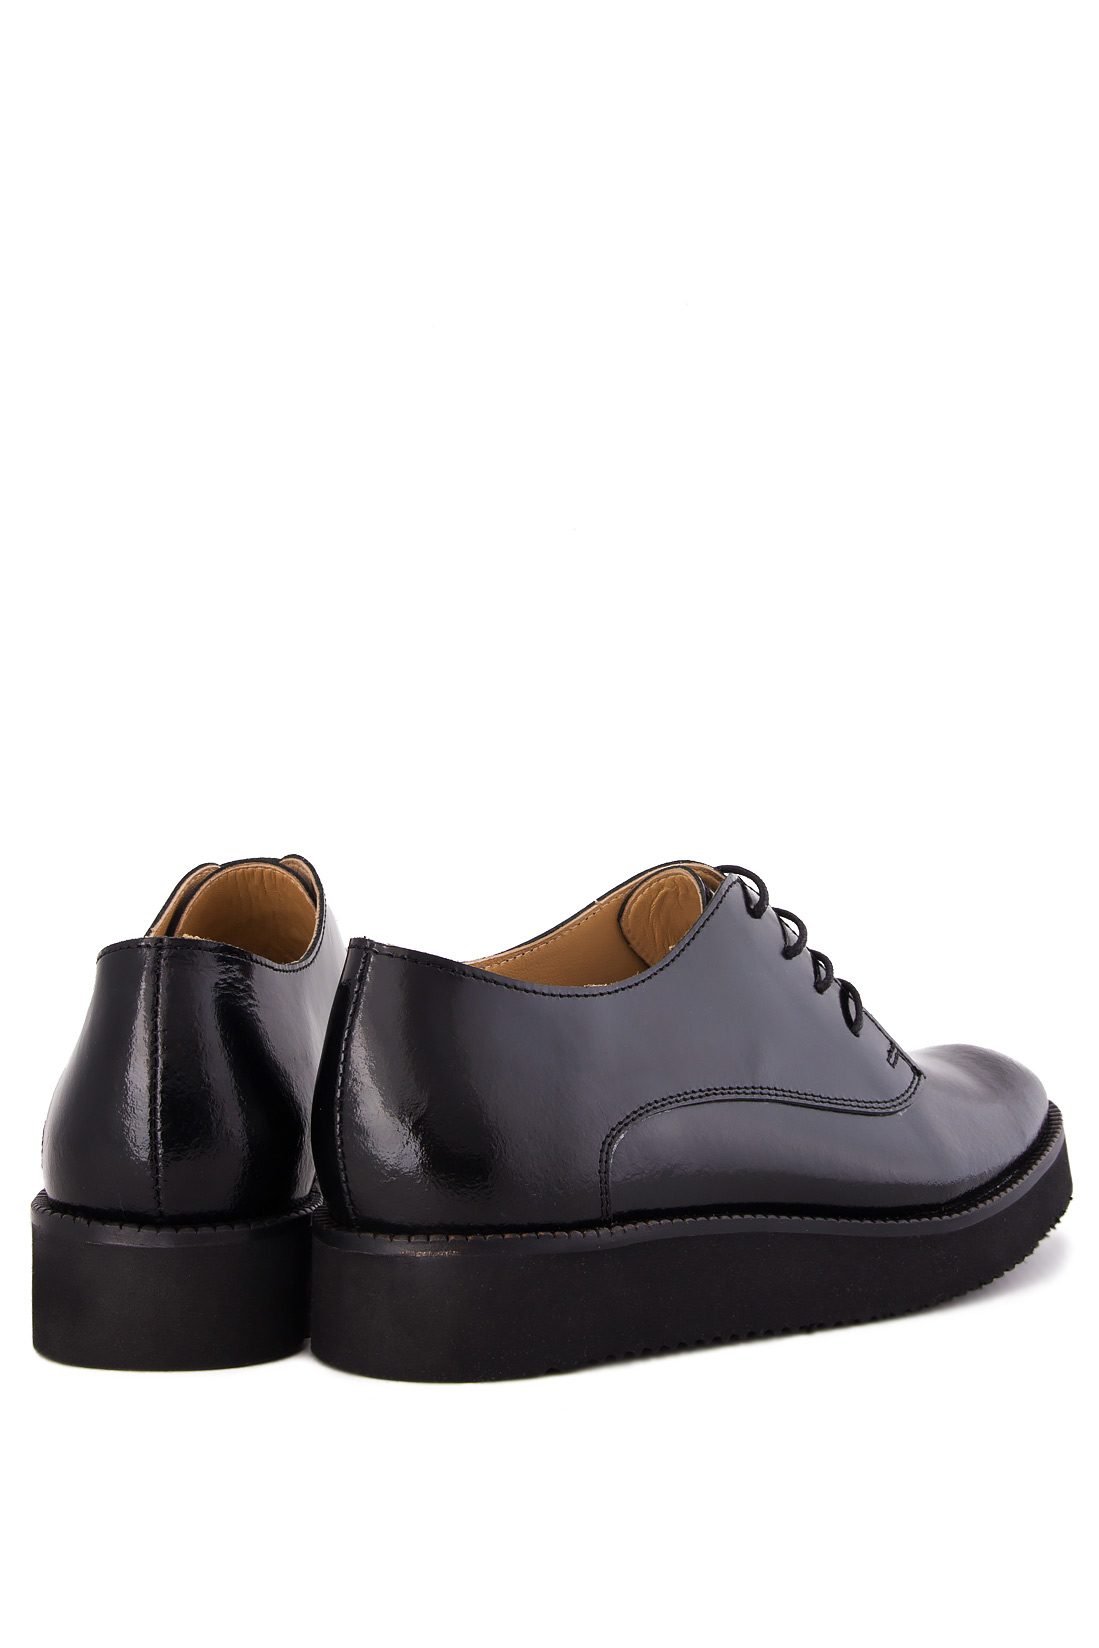 Leather platform loafers Mihaela Gheorghe image 2